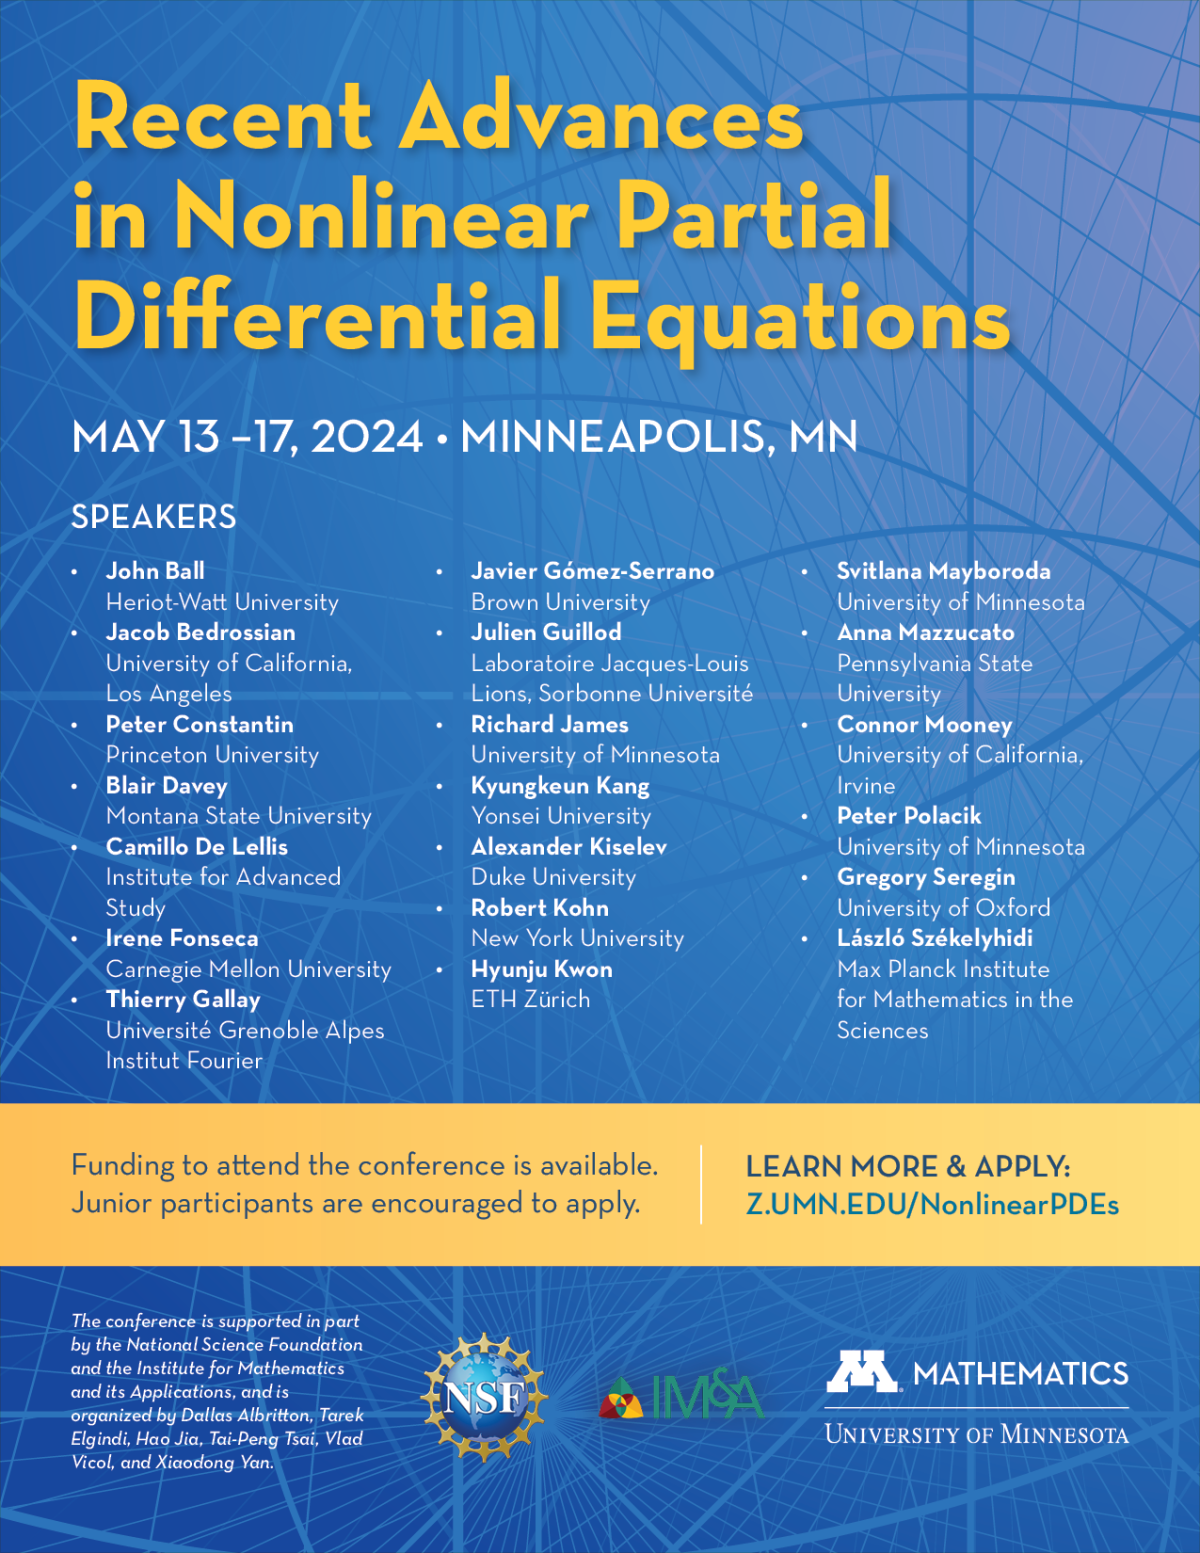 Recent Advances in Nonlinear Partial Differential Equations Poster